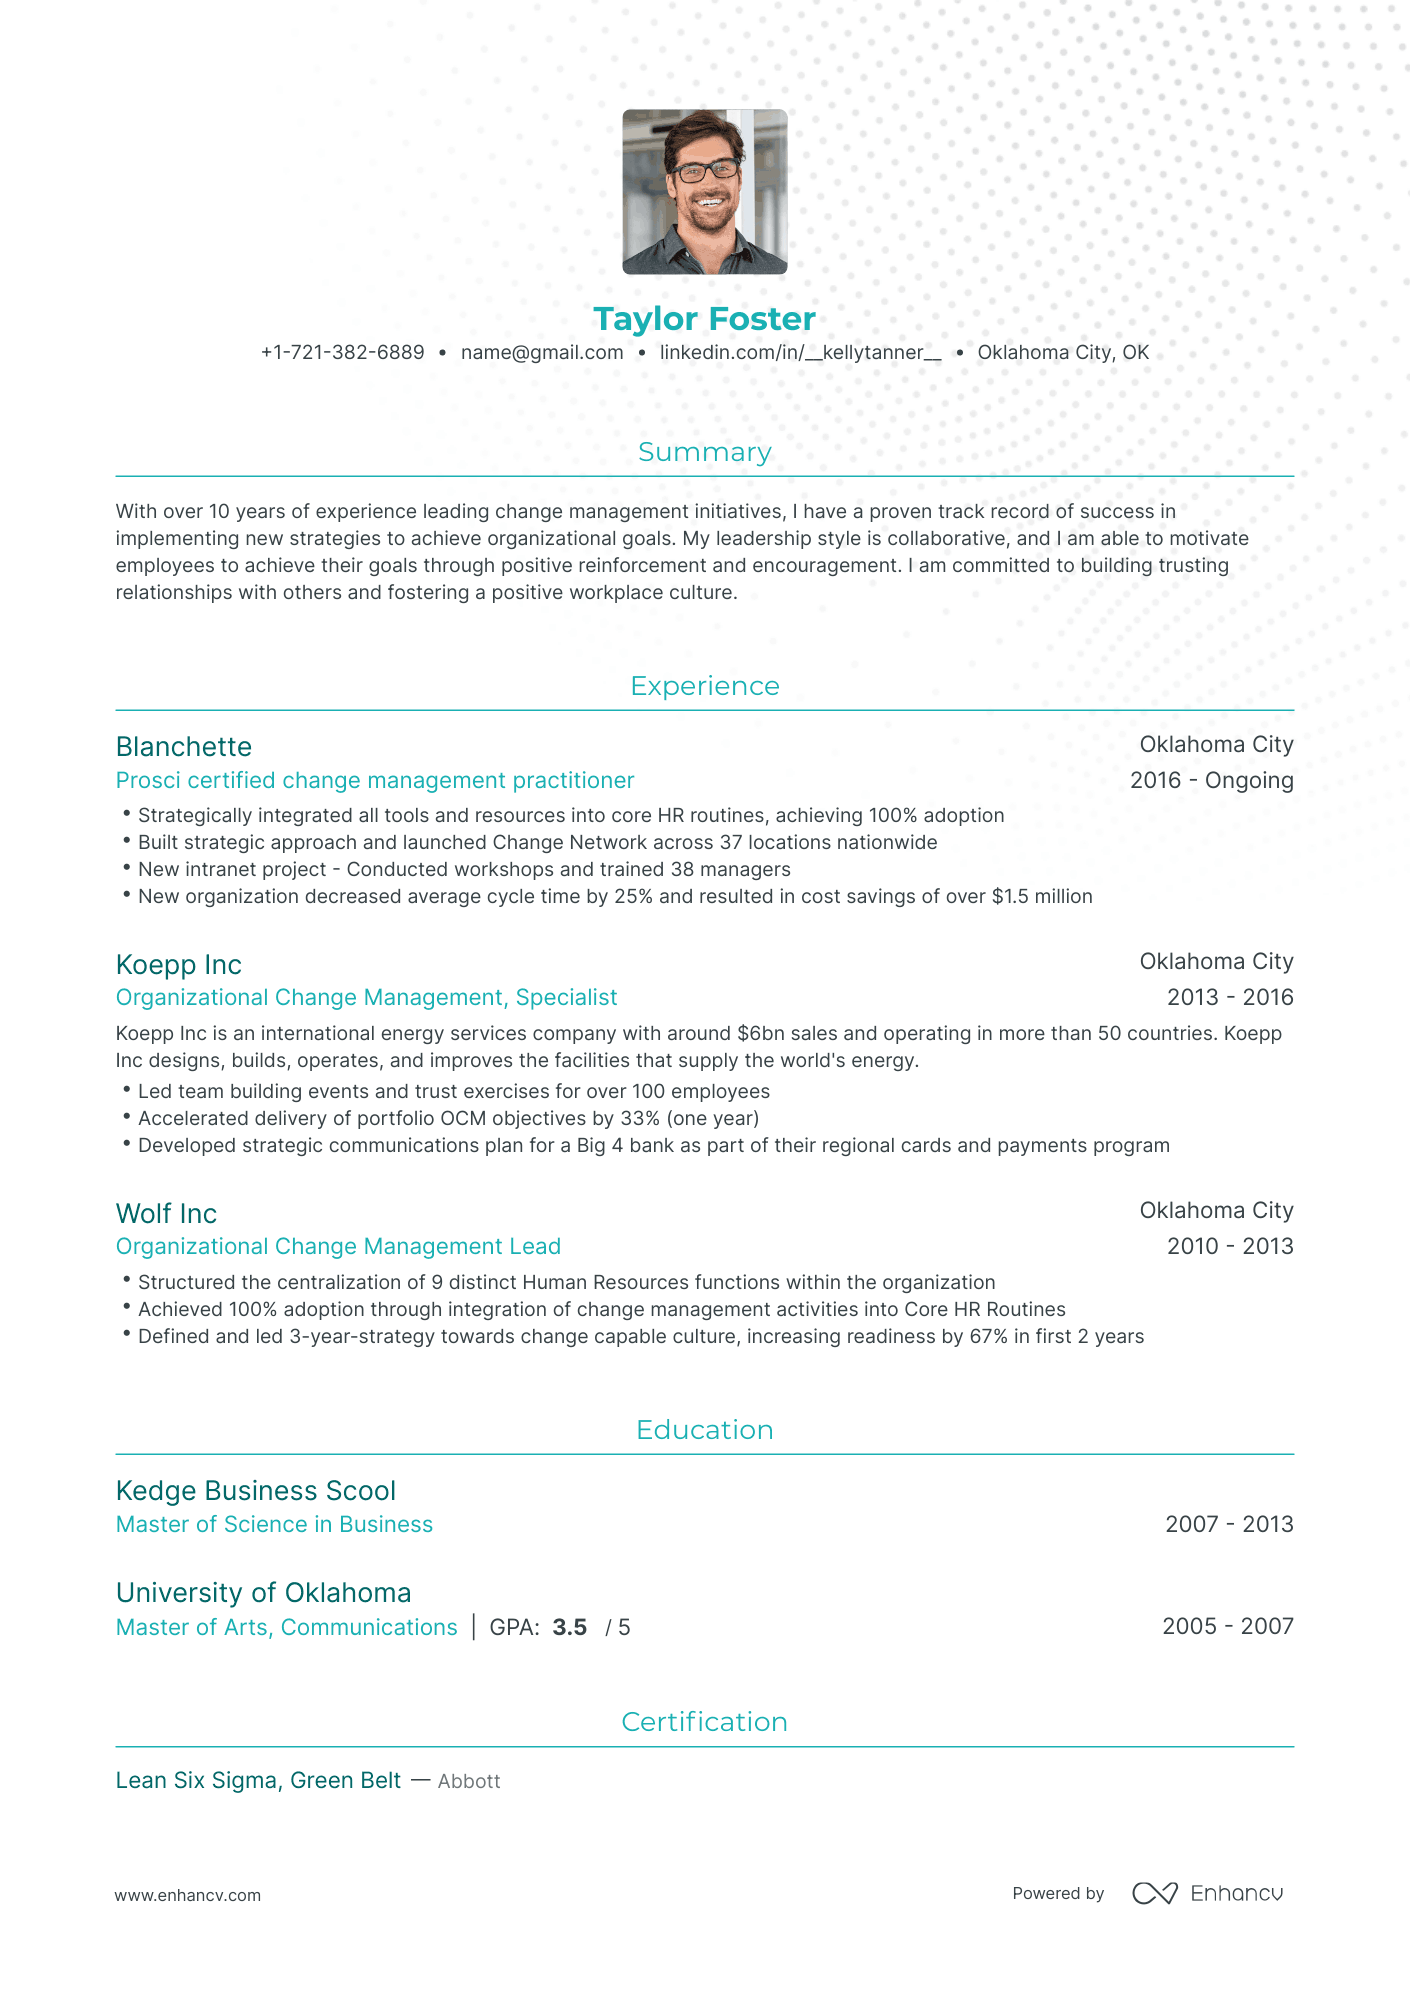 Traditional Change Management Resume Template